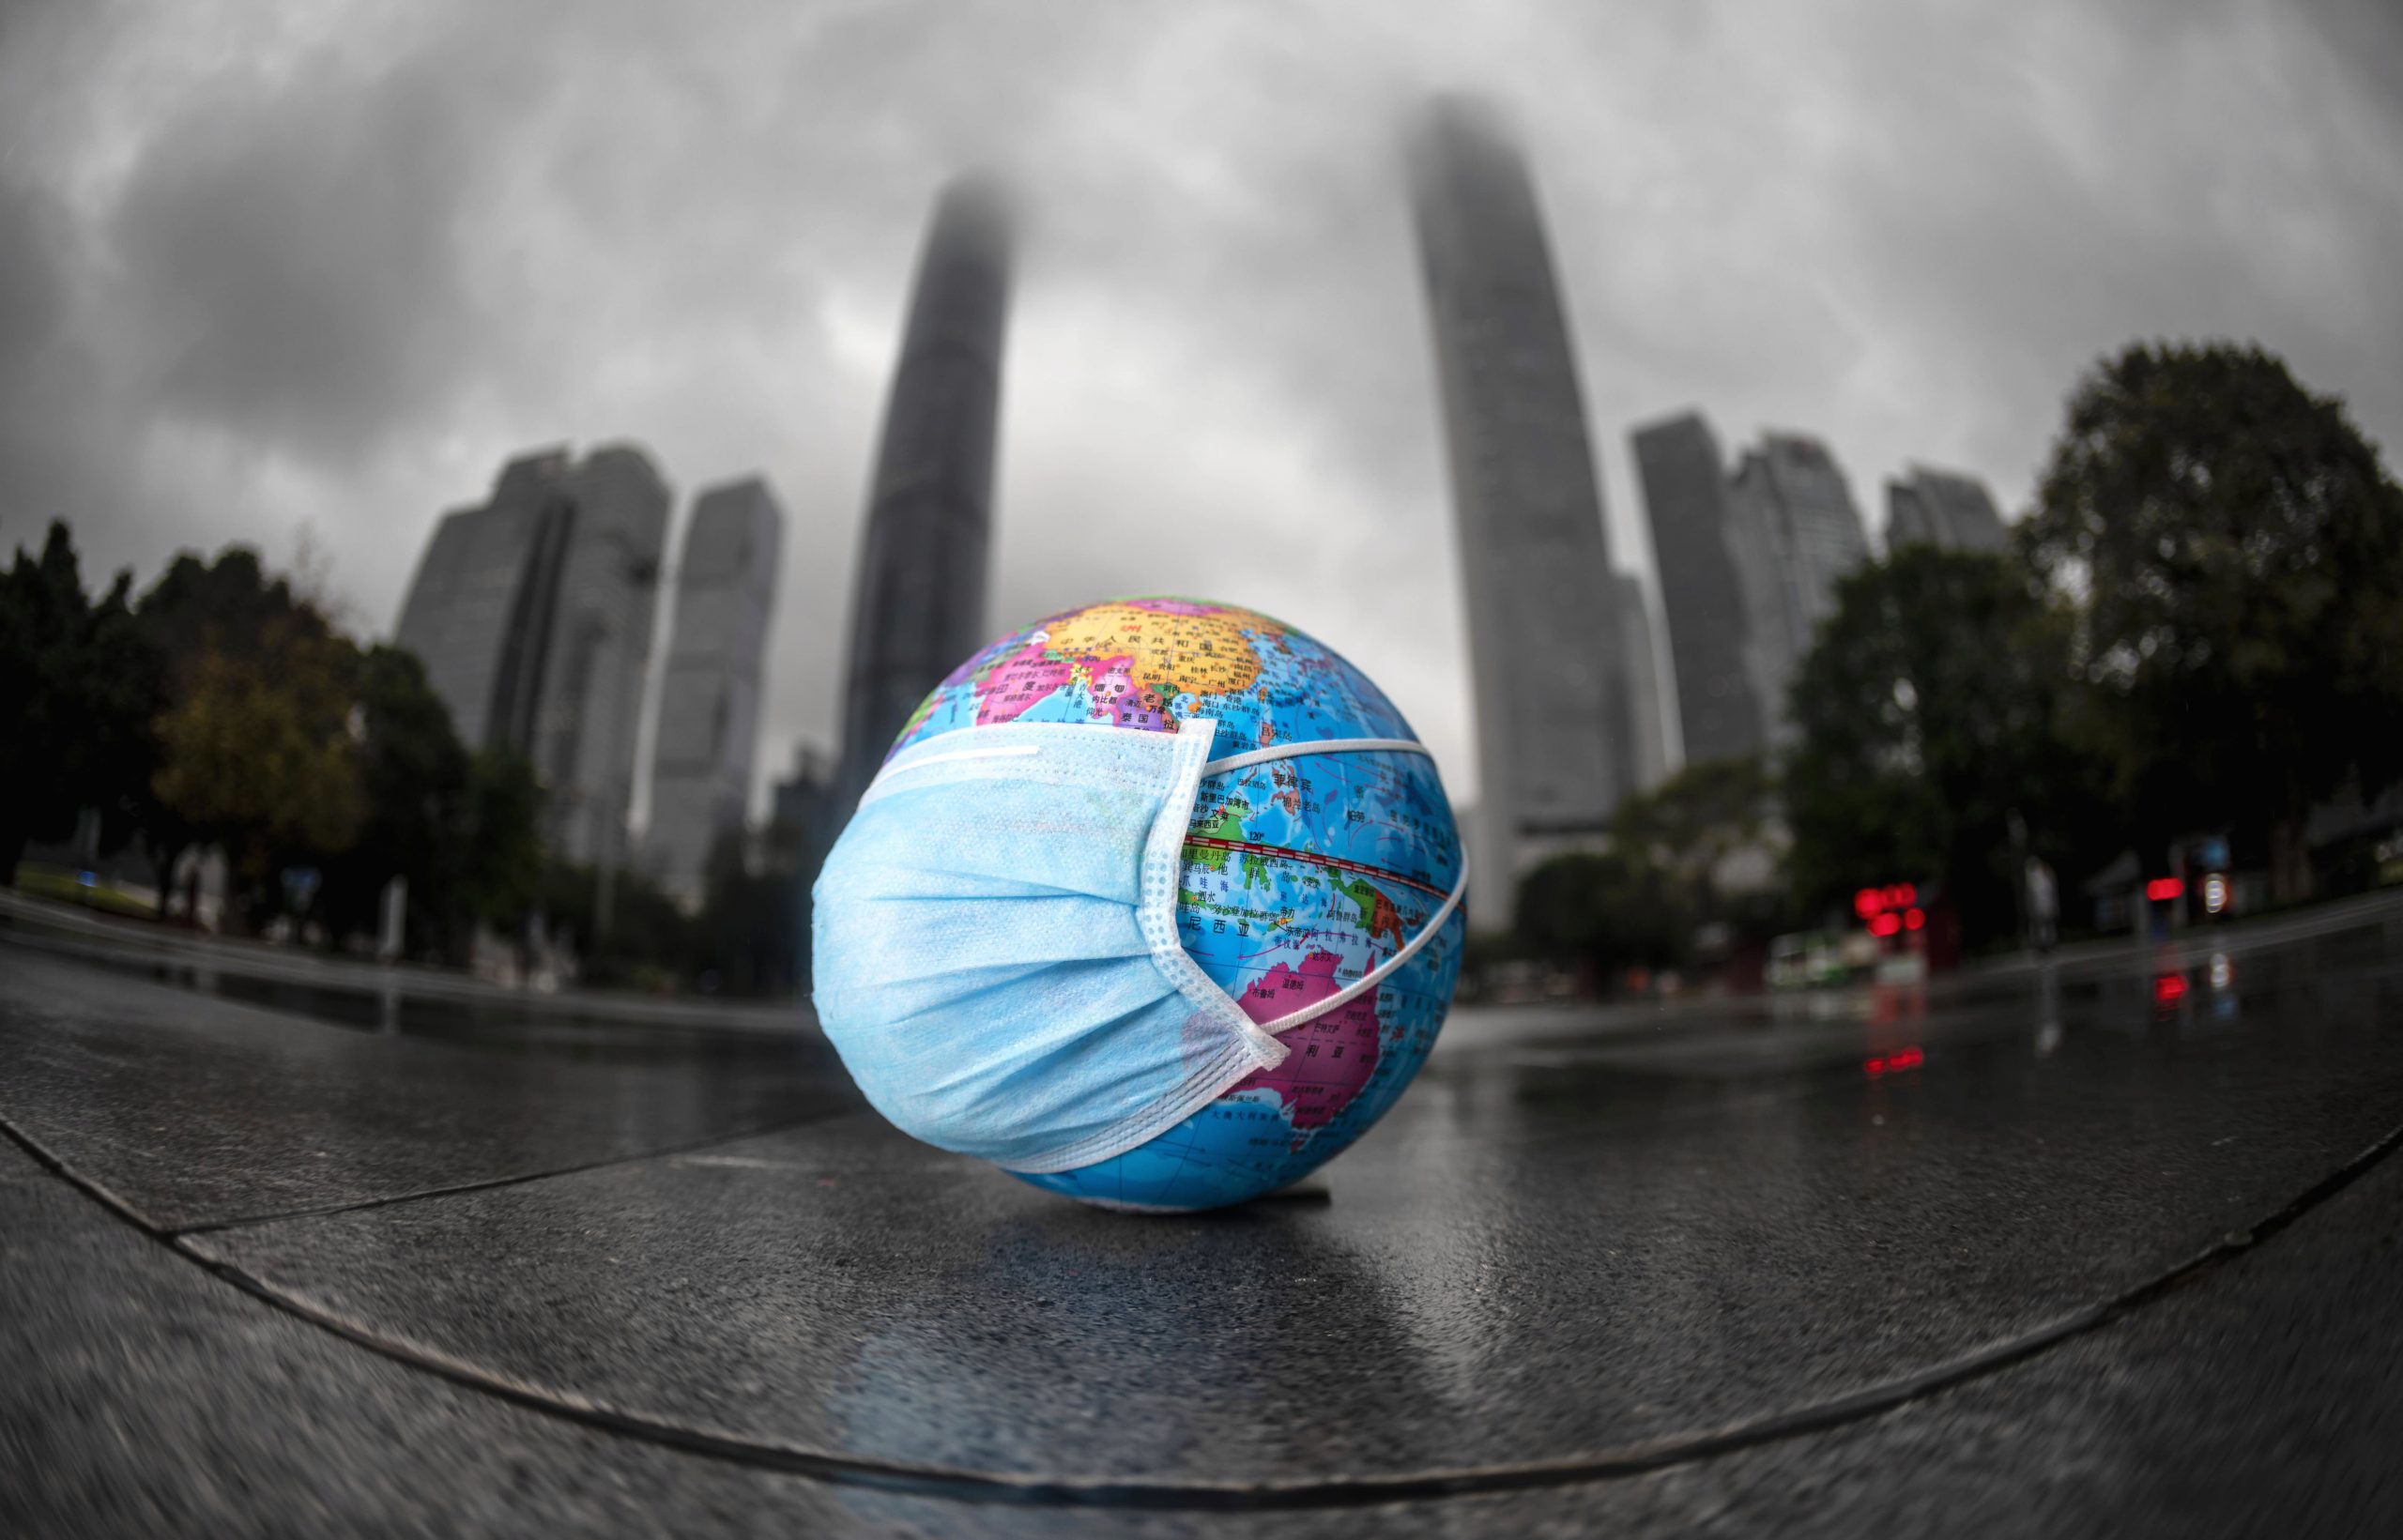 epa08376968 A model of the globe with a face mask left on the ground by the children who were playing with it in Guangzhou, Guangdong province, China, 22 April 2020. World Earth Day is marked in many countries annually on 22 April to raise awareness of environmental protection.  EPA/ALEX PLAVEVSKI